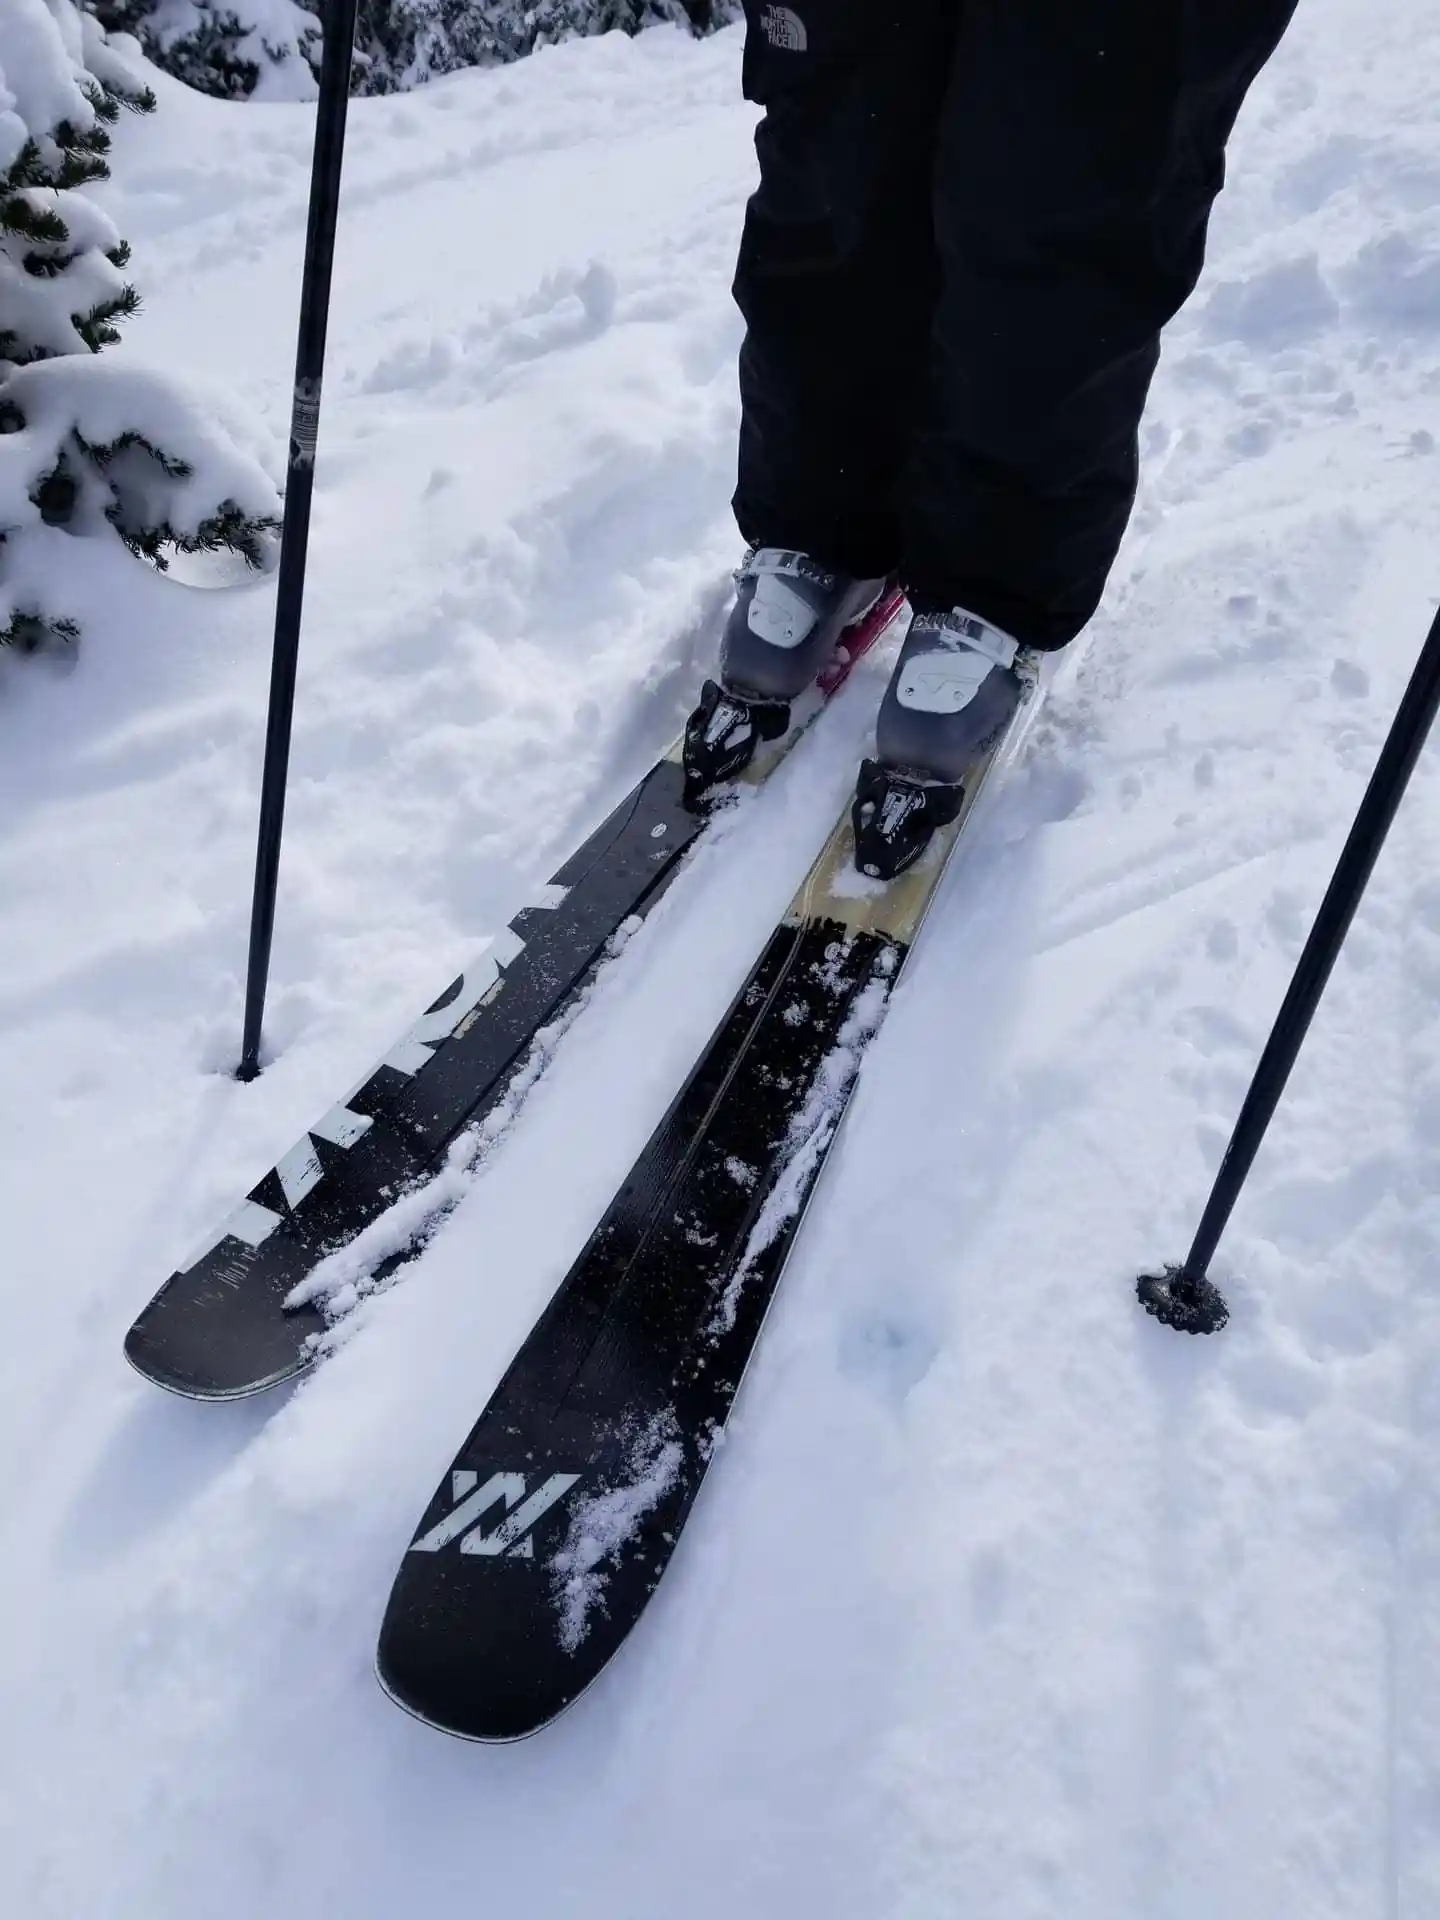 Lindsey's new skis on the snow